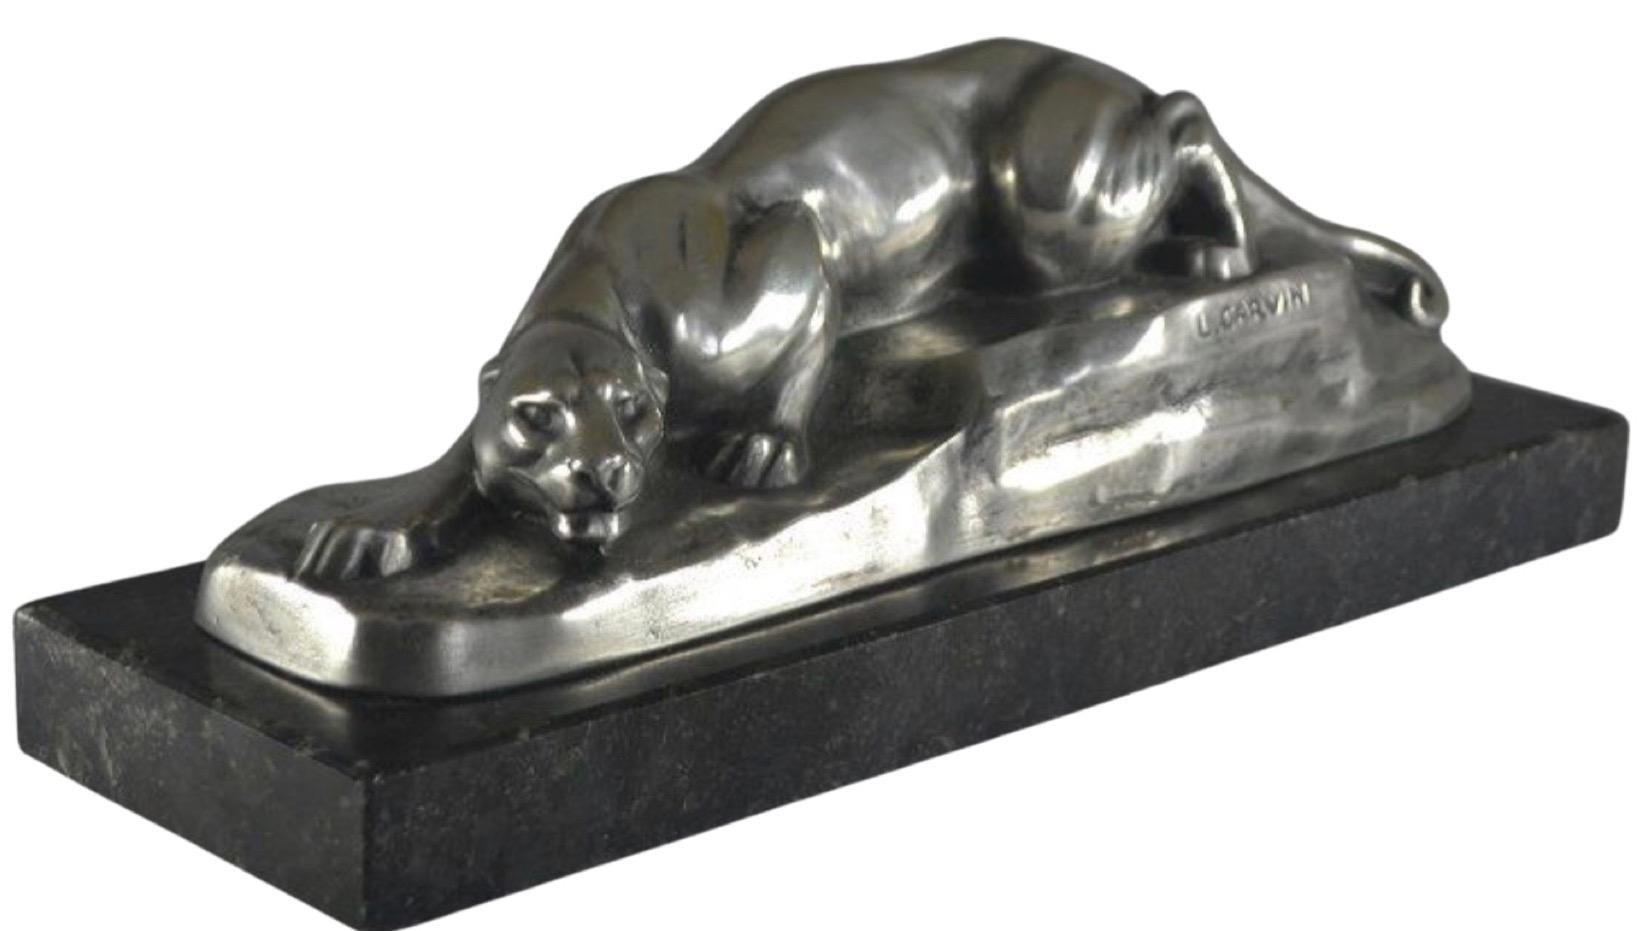 Louis Carvin Cubist Bronze Panther Silver-plated on Marble For Sale 2